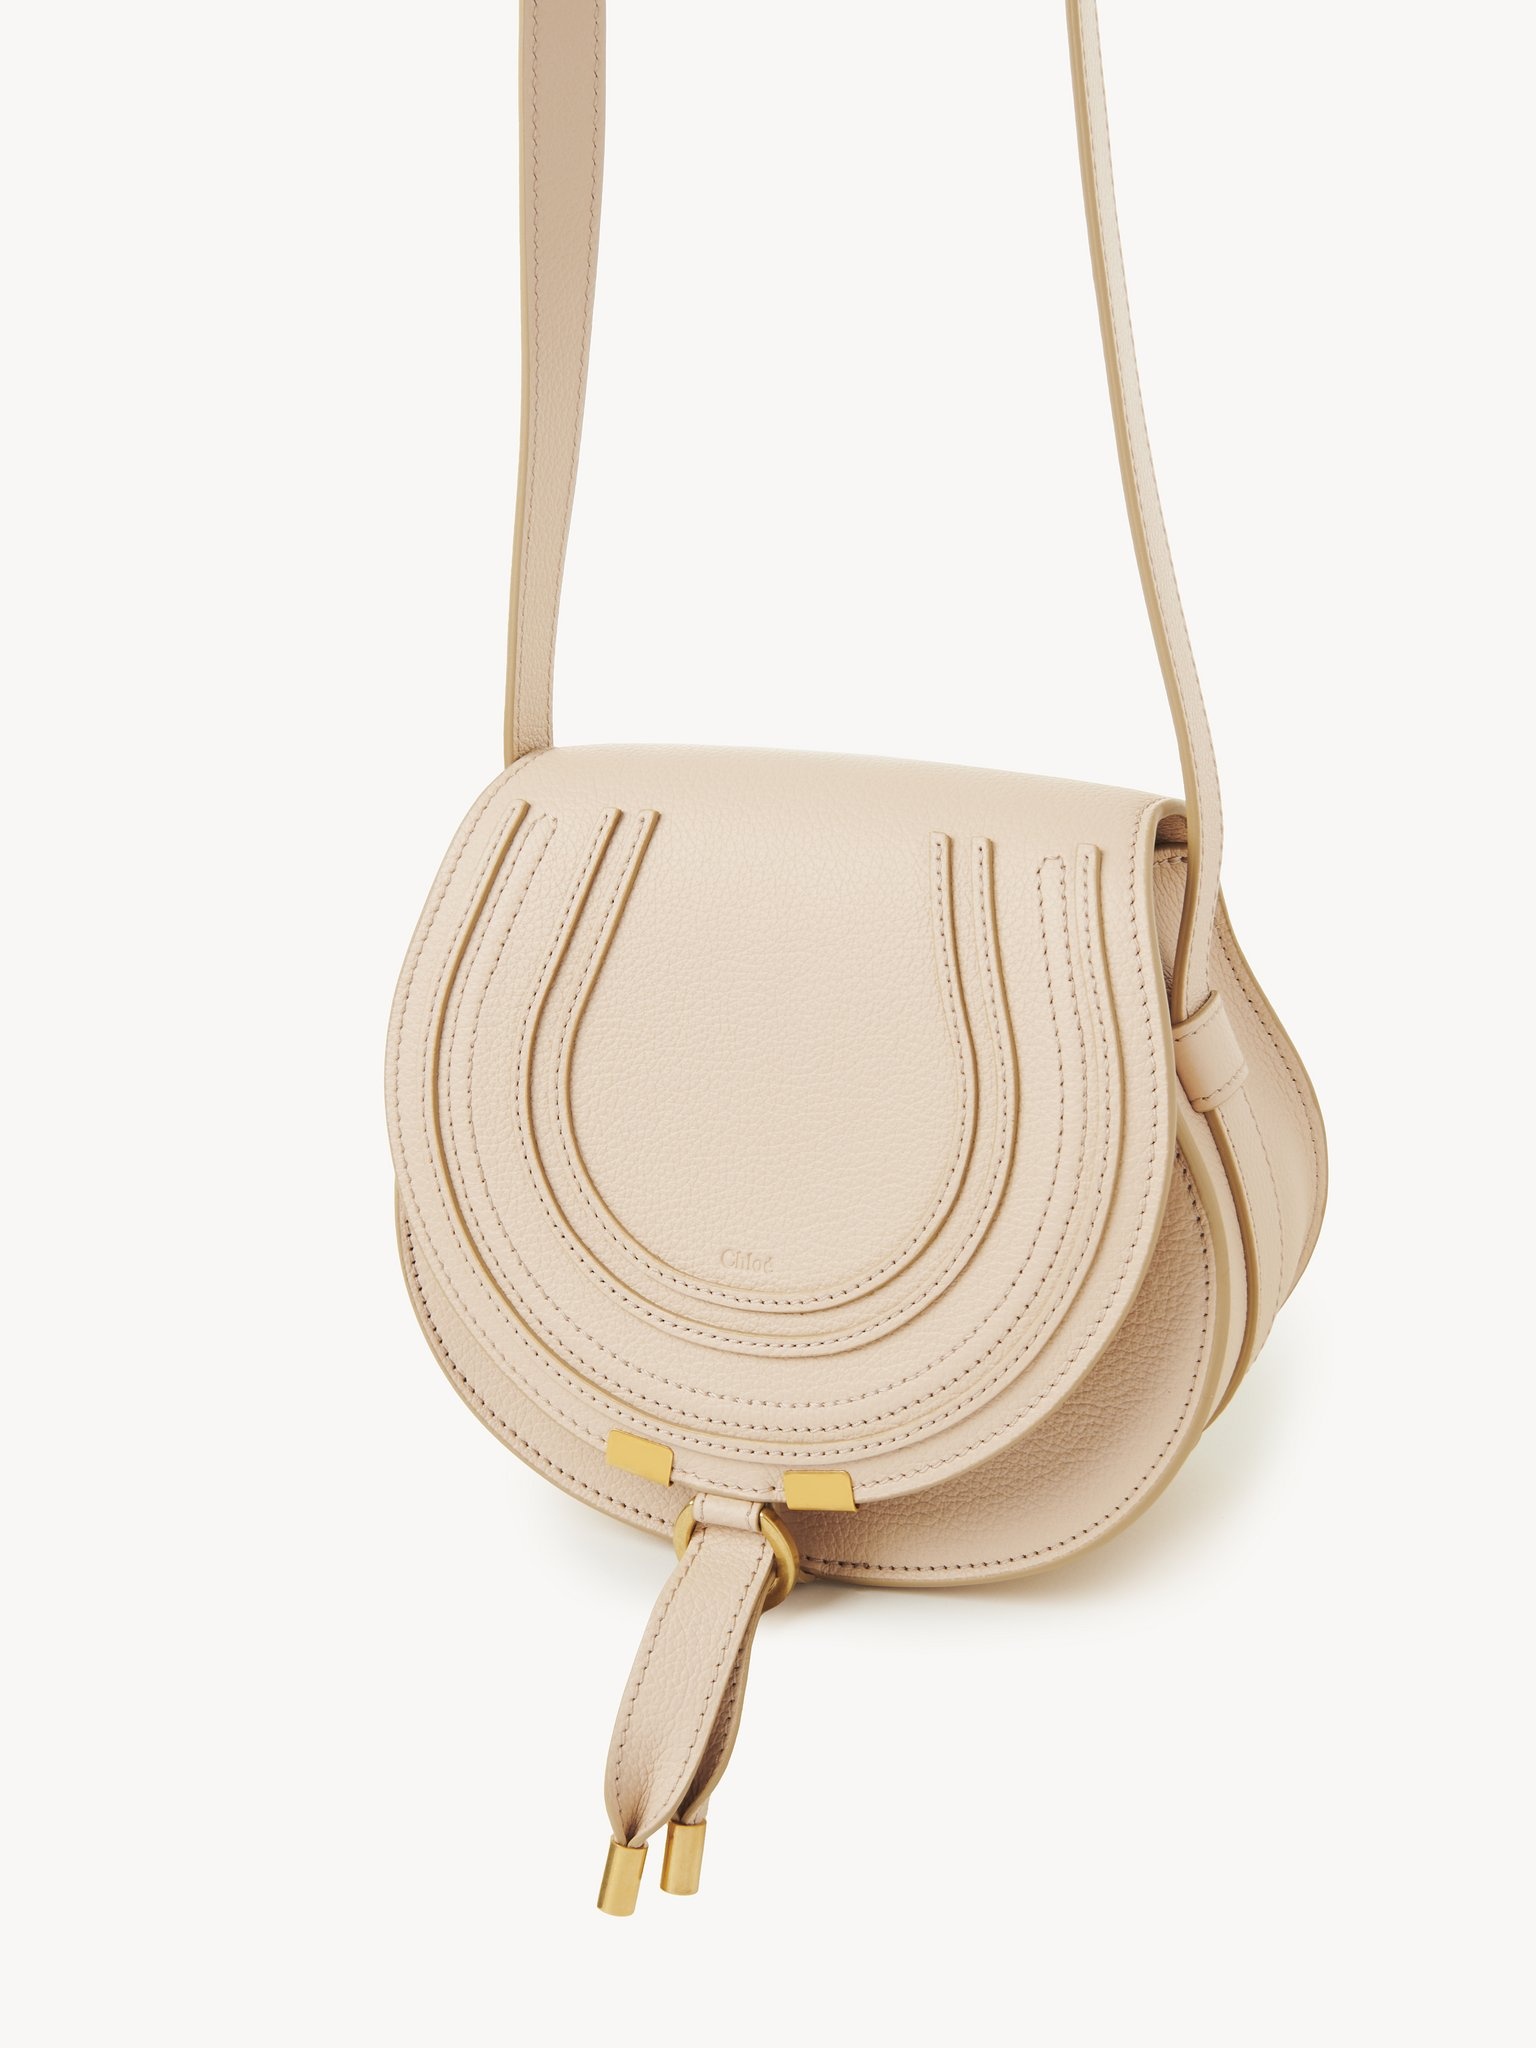 SMALL MARCIE SADDLE BAG IN GRAINED LEATHER - 3